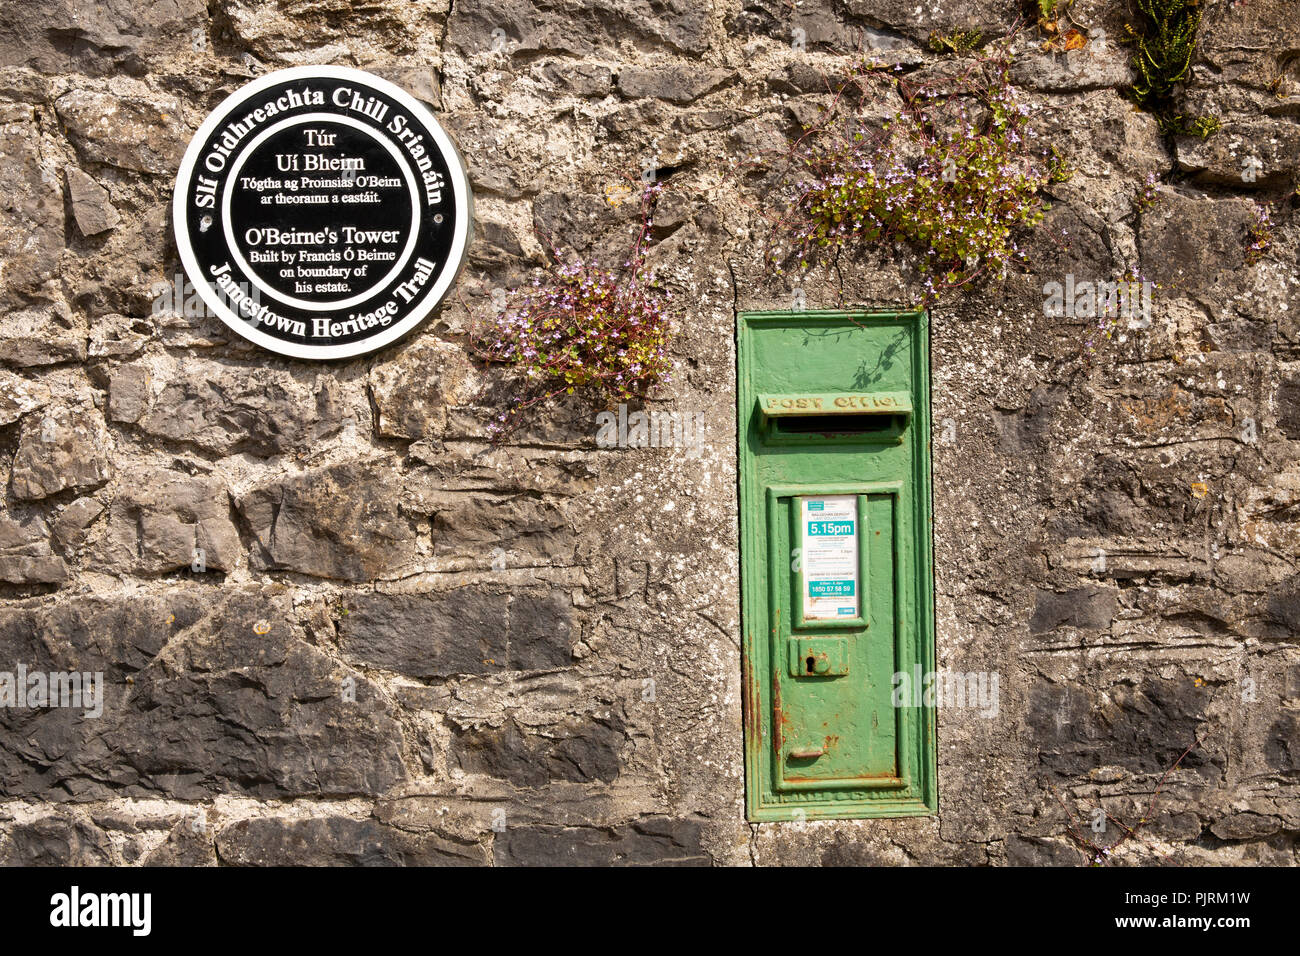 Ireland, Co Leitrim, Jamestown, Heritage Trail, O’Beirne’s tower plaque and green post box in stone wall Stock Photo